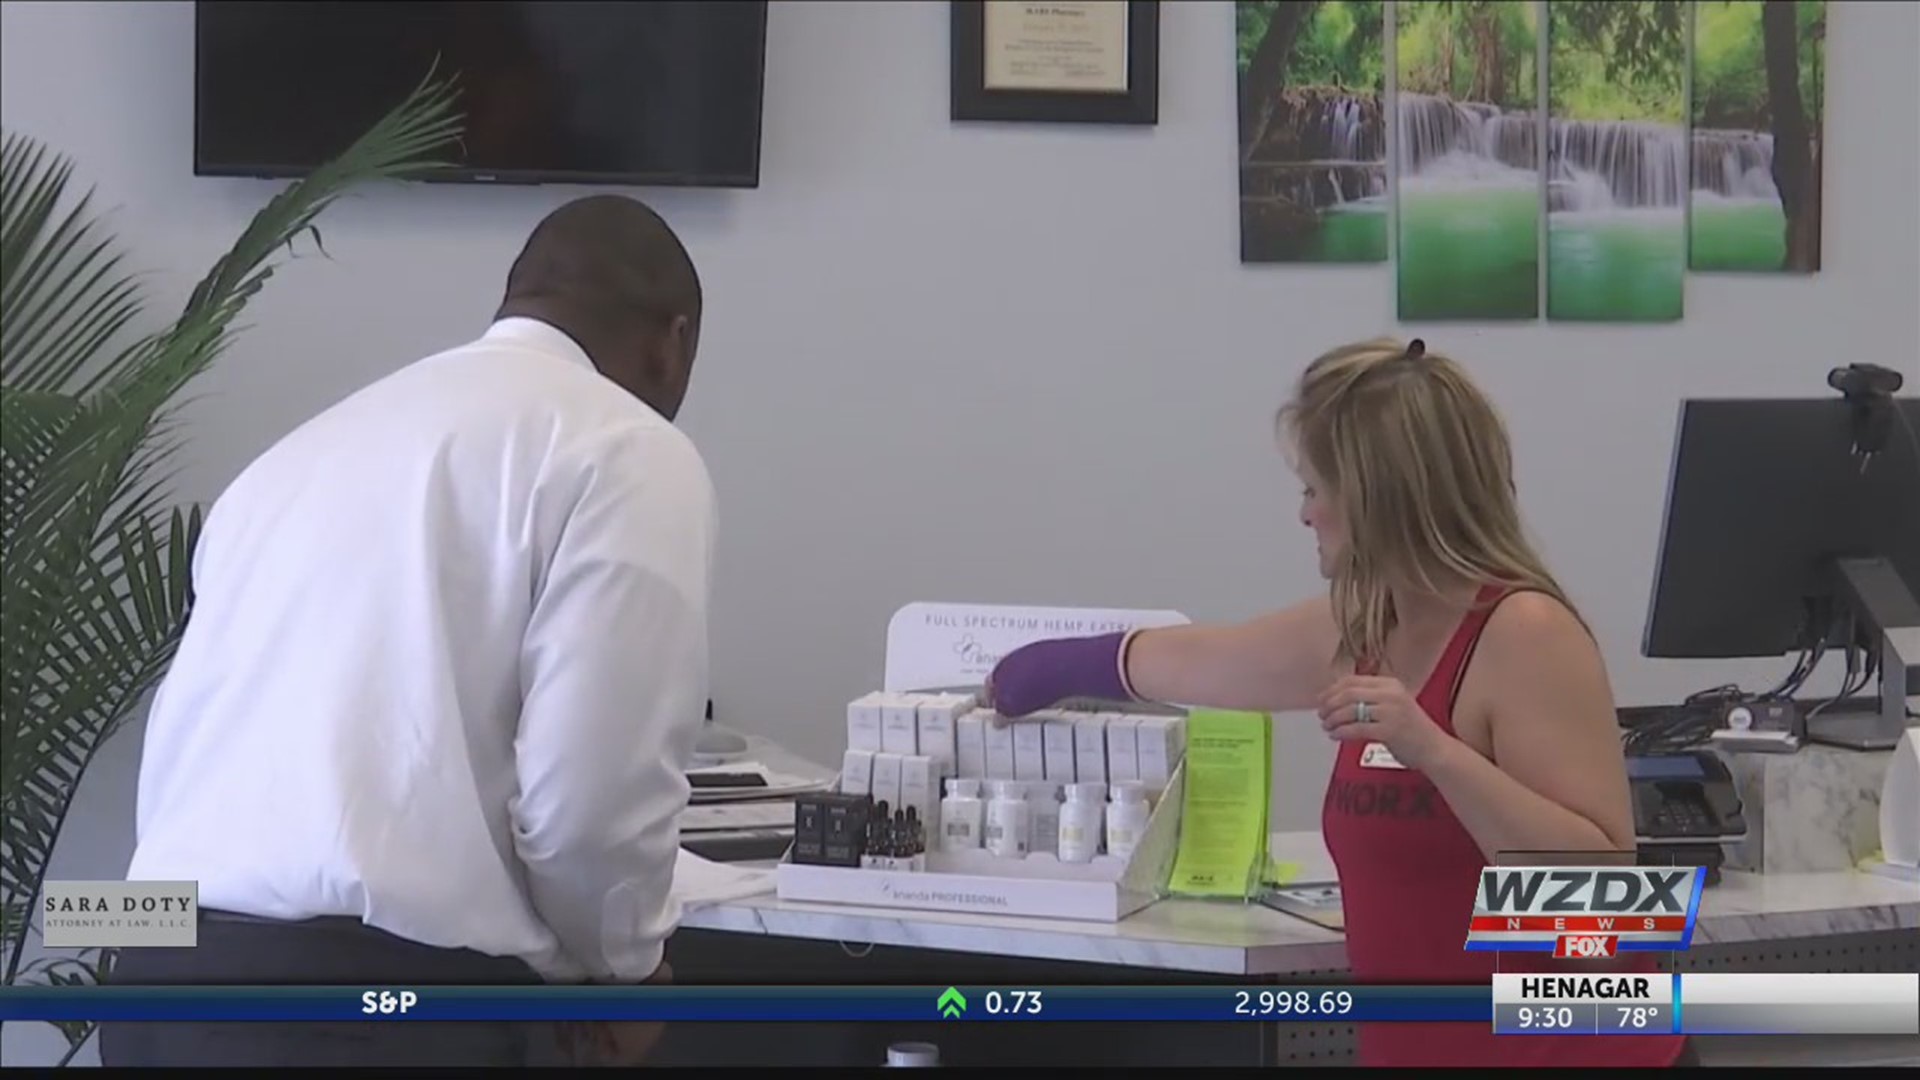 CBD products are now being sold in Alabama pharmacies, due to a new law. The law allows pharmacies to sell CBD products containing no more than 0.3 percent THC, but the state health department is warning people to be cautious.